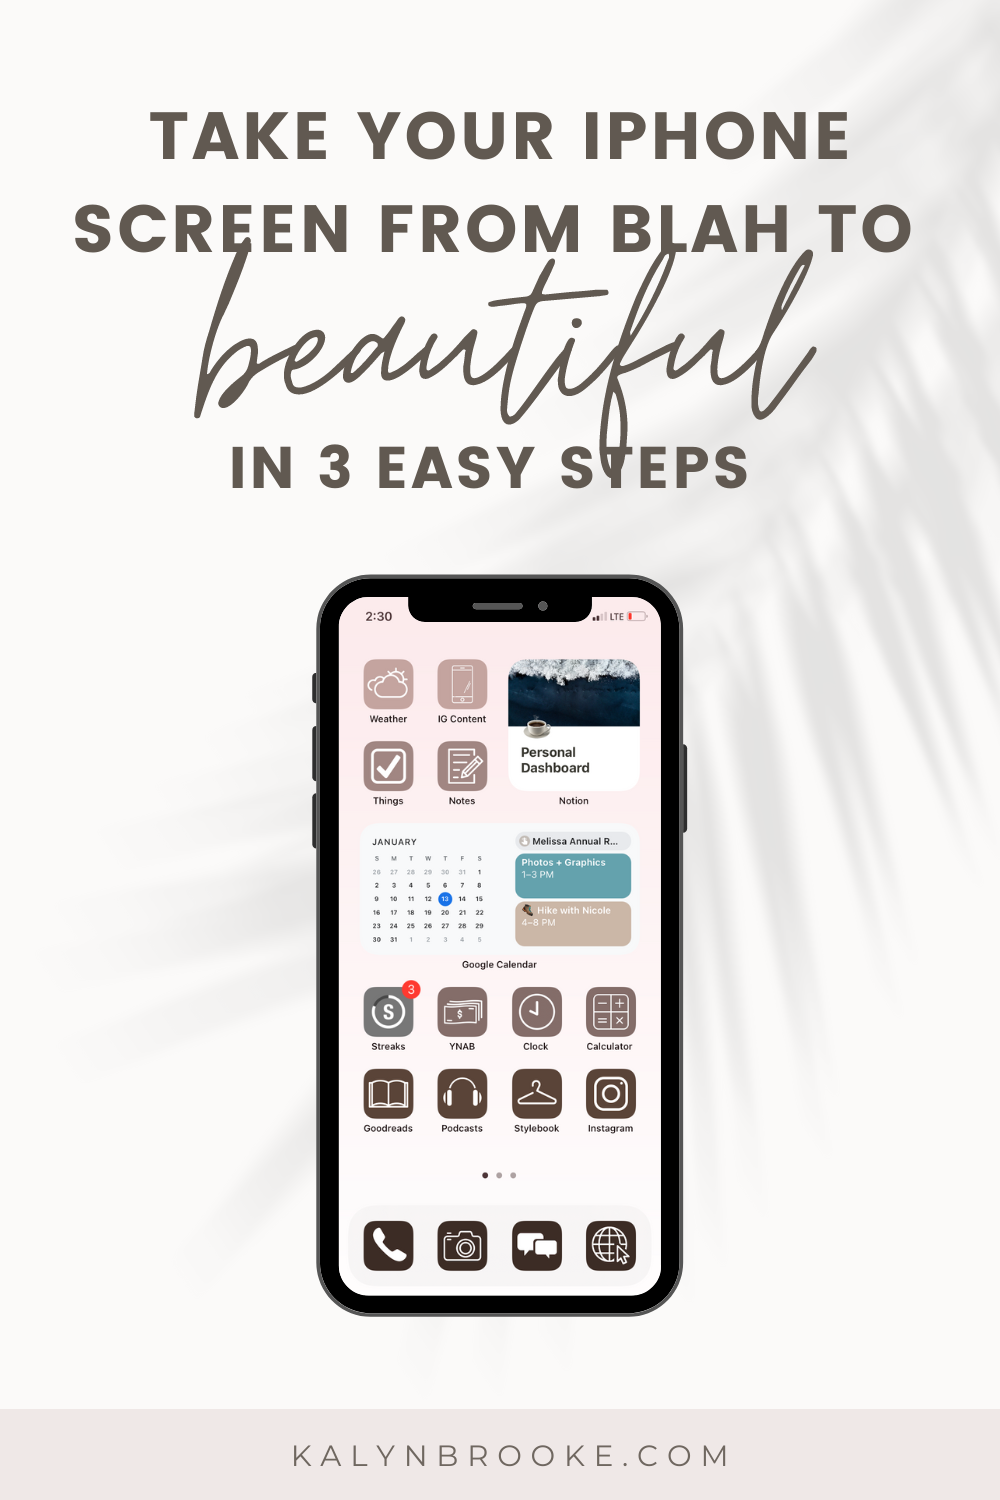 Efficient Smartphone Home Screen Organization for Productivity